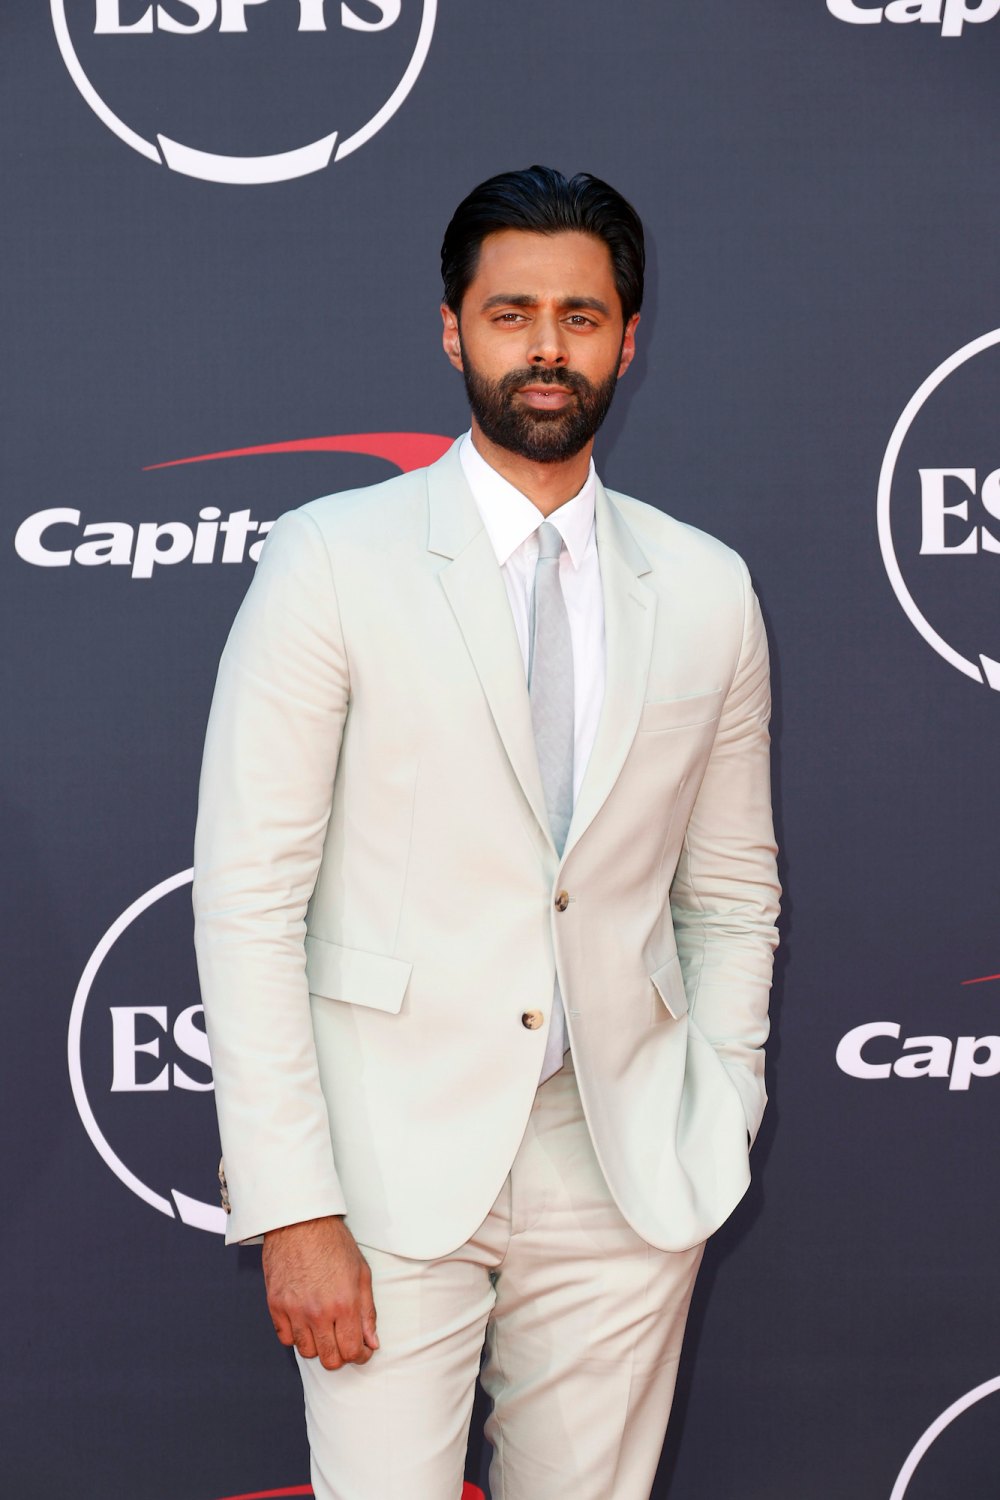 Hasan Minhaj Responds to Misleading Claims He Lied in Stand Up Routine